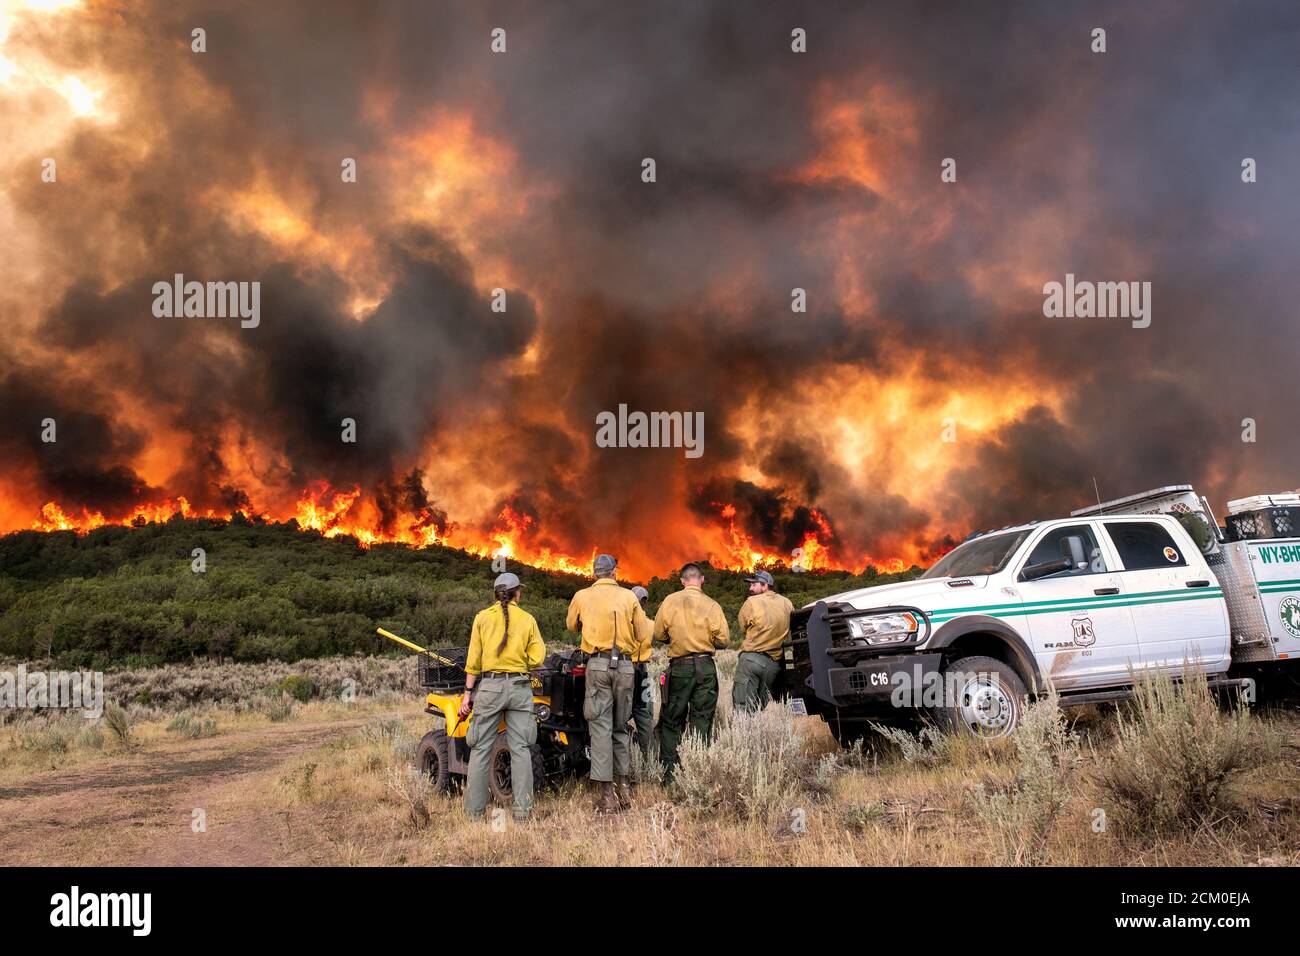 Firefighters watch the intense flames at the Pine Gulch Fire on the Western Slope August 2, 2020 near Grand Junction, Colorado. The wildfire is the largest in the history of Colorado destroying tens of thousands of ranch and wildlife habitats. Stock Photo